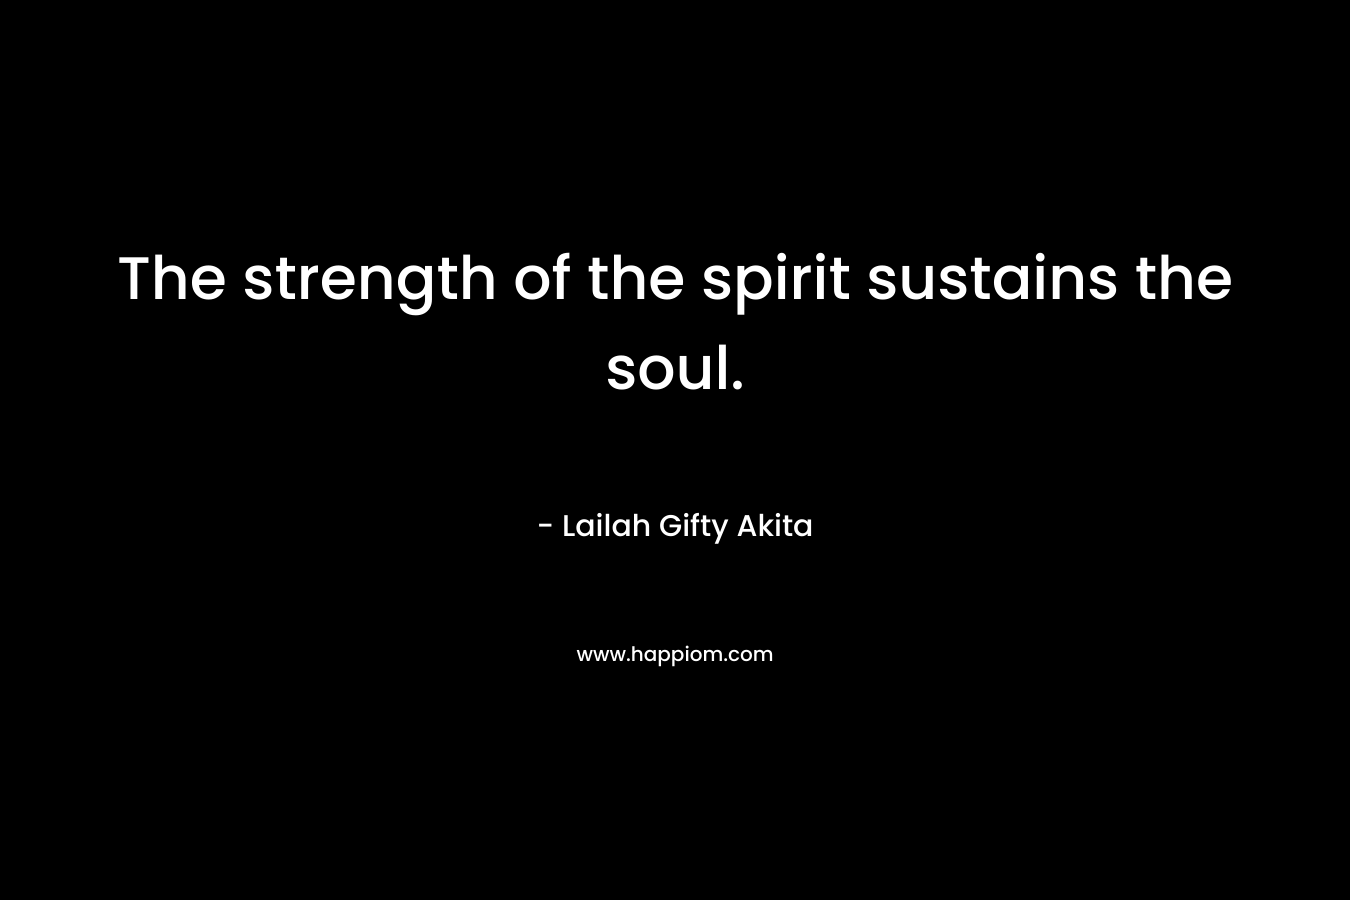 The strength of the spirit sustains the soul.